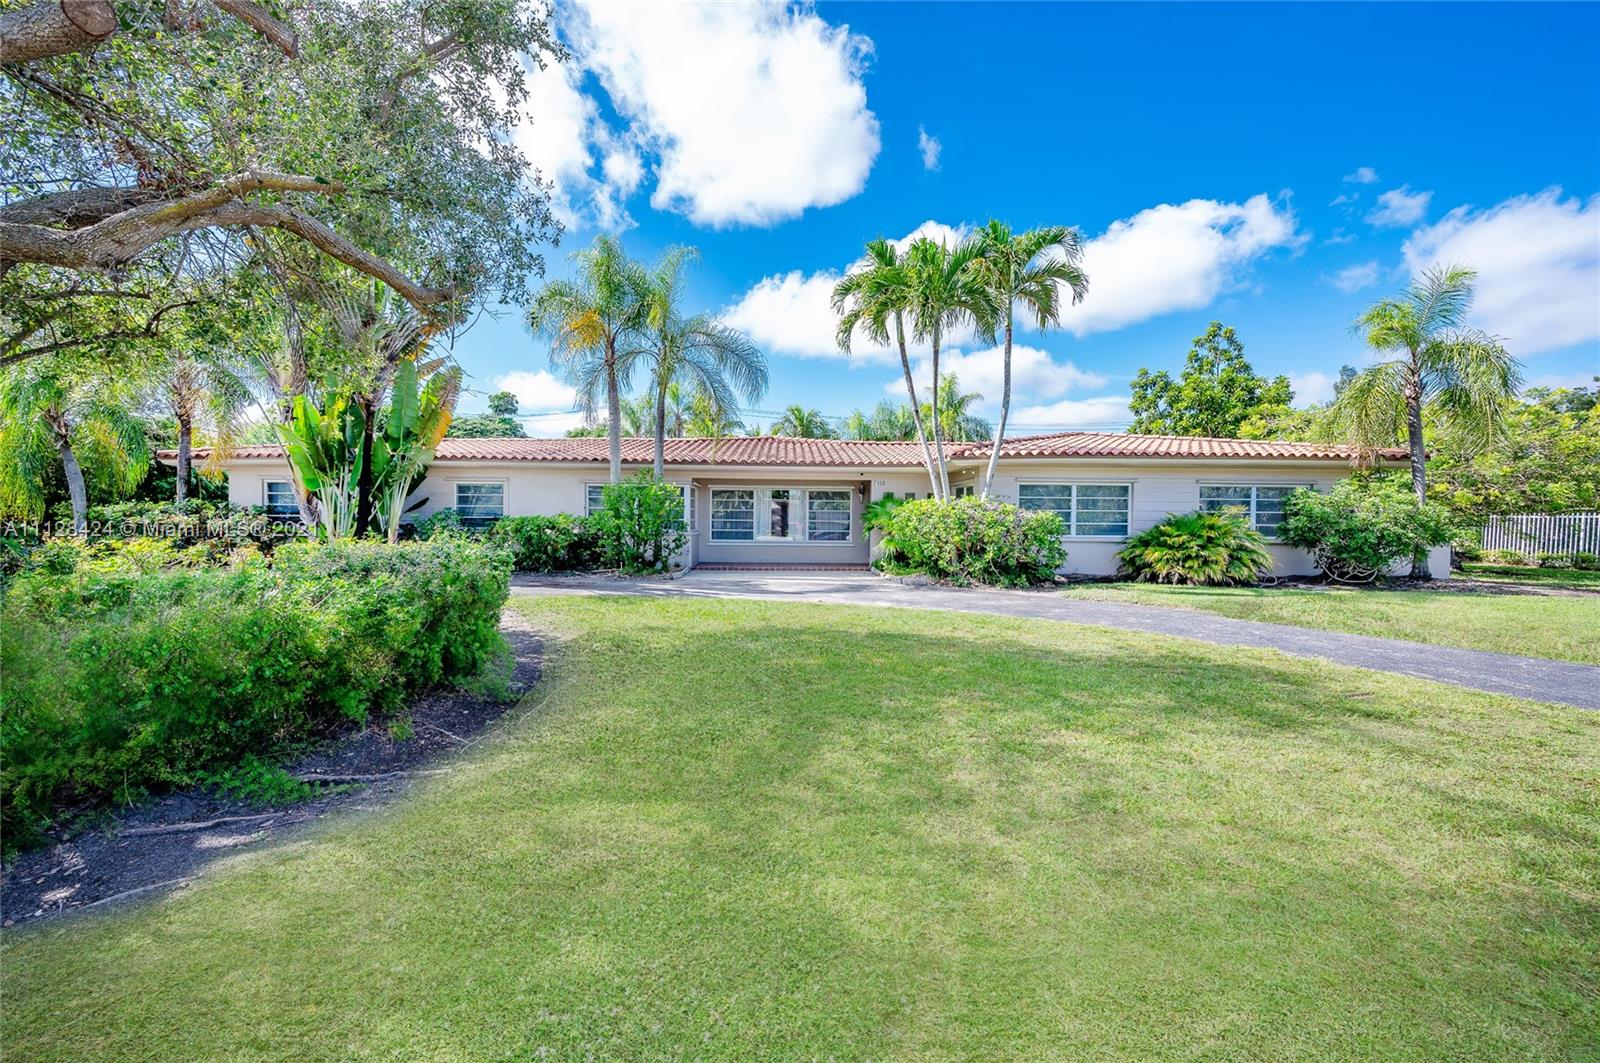 Don't miss out on this dynamite opportunity to be on a large estate styled lot which is centrally located with easy access to the Palmetto Expressway. This 3/2 pool home provides 1,836 sq. ft. of living area and boasts a well equipped kitchen with granite countertops, a double wall oven, flat top stove, side by side refrigerator, and a pass through window leading to the outdoor kitchen. The floor plan is well proportioned with a formal dining room and large living area which provides an expansive view of a gorgeous oversized pool patio. There is also a covered terrace with an outdoor kitchen/barbecue area that is perfect for entertaining. The updated cabana bath provides easy access in & out and doubles as an adequate changing room for swimmers. Contact Alex today to schedule a showing.